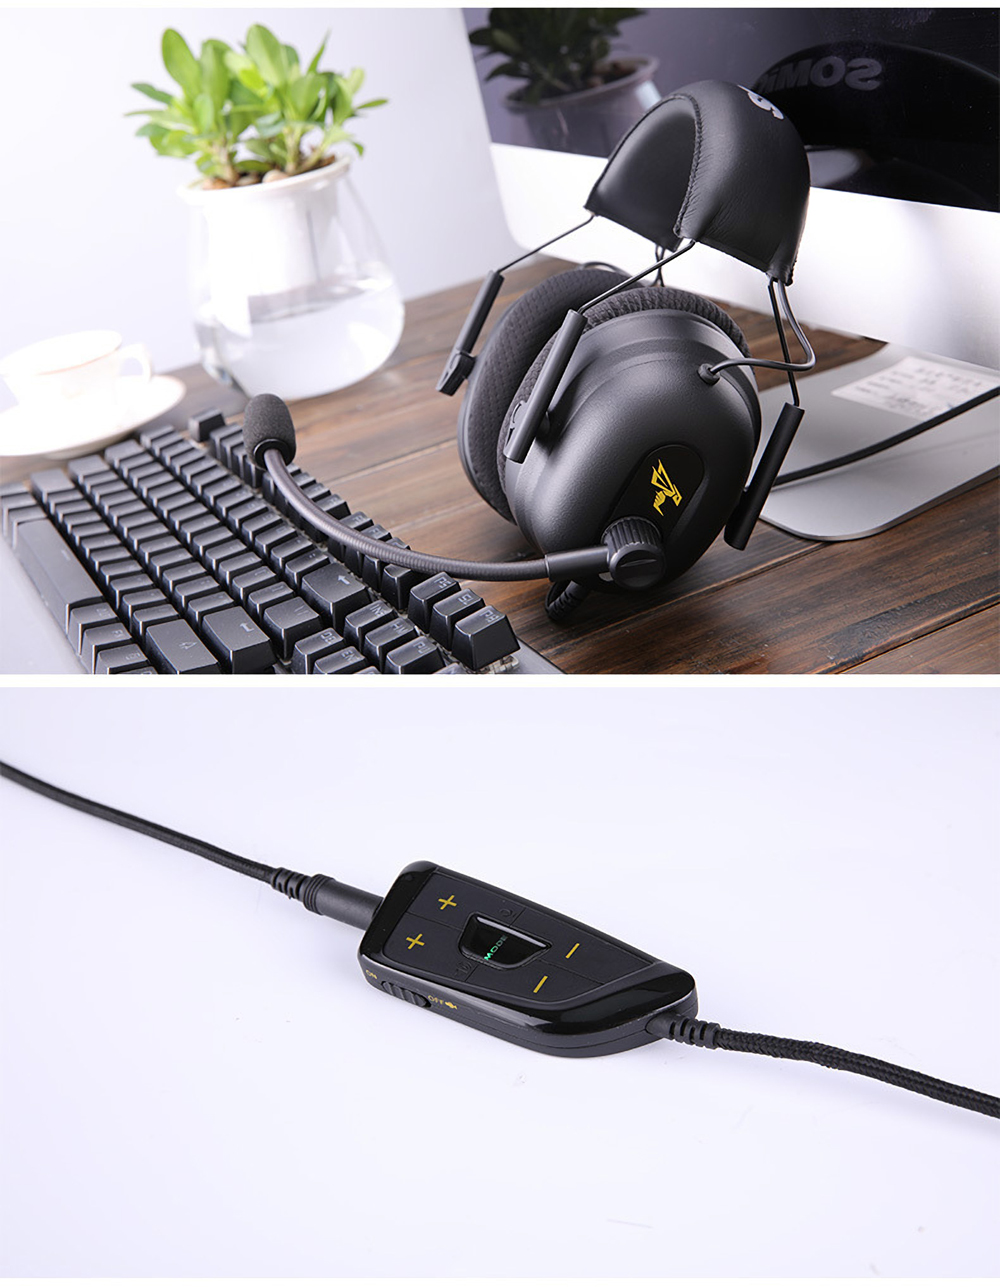 SOMiC G936N Virtual 7.1 Surround Sound 3.5mm + USB Gaming Headphone Headset for PS4 XBOX 13